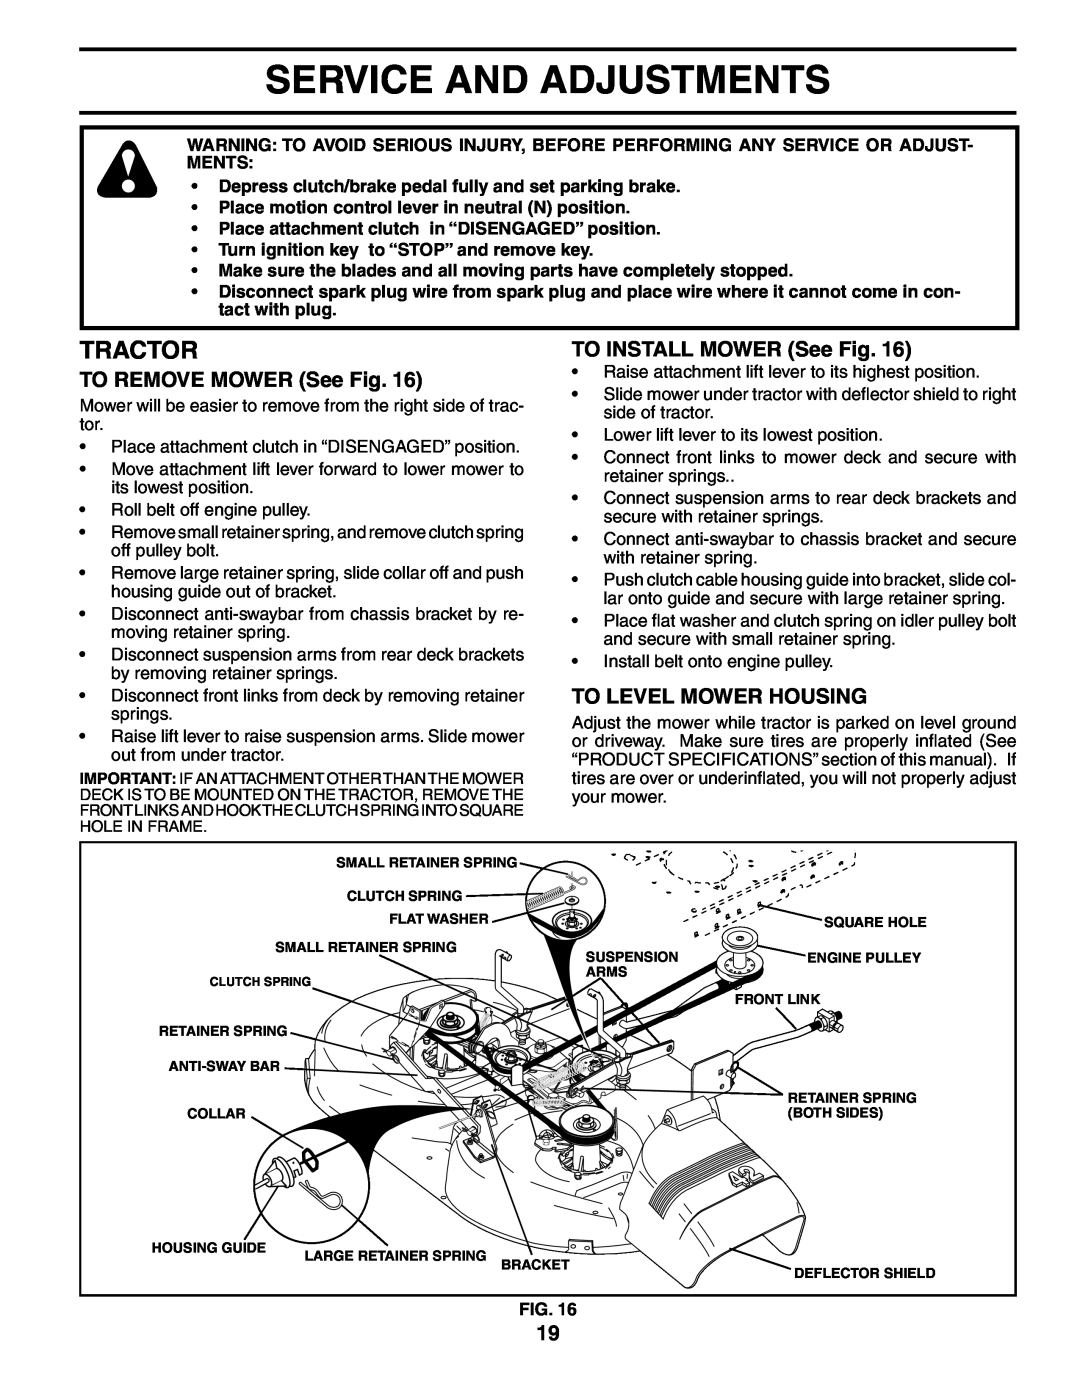 Poulan PO17H42STB manual Service And Adjustments, TO REMOVE MOWER See Fig, TO INSTALL MOWER See Fig, To Level Mower Housing 